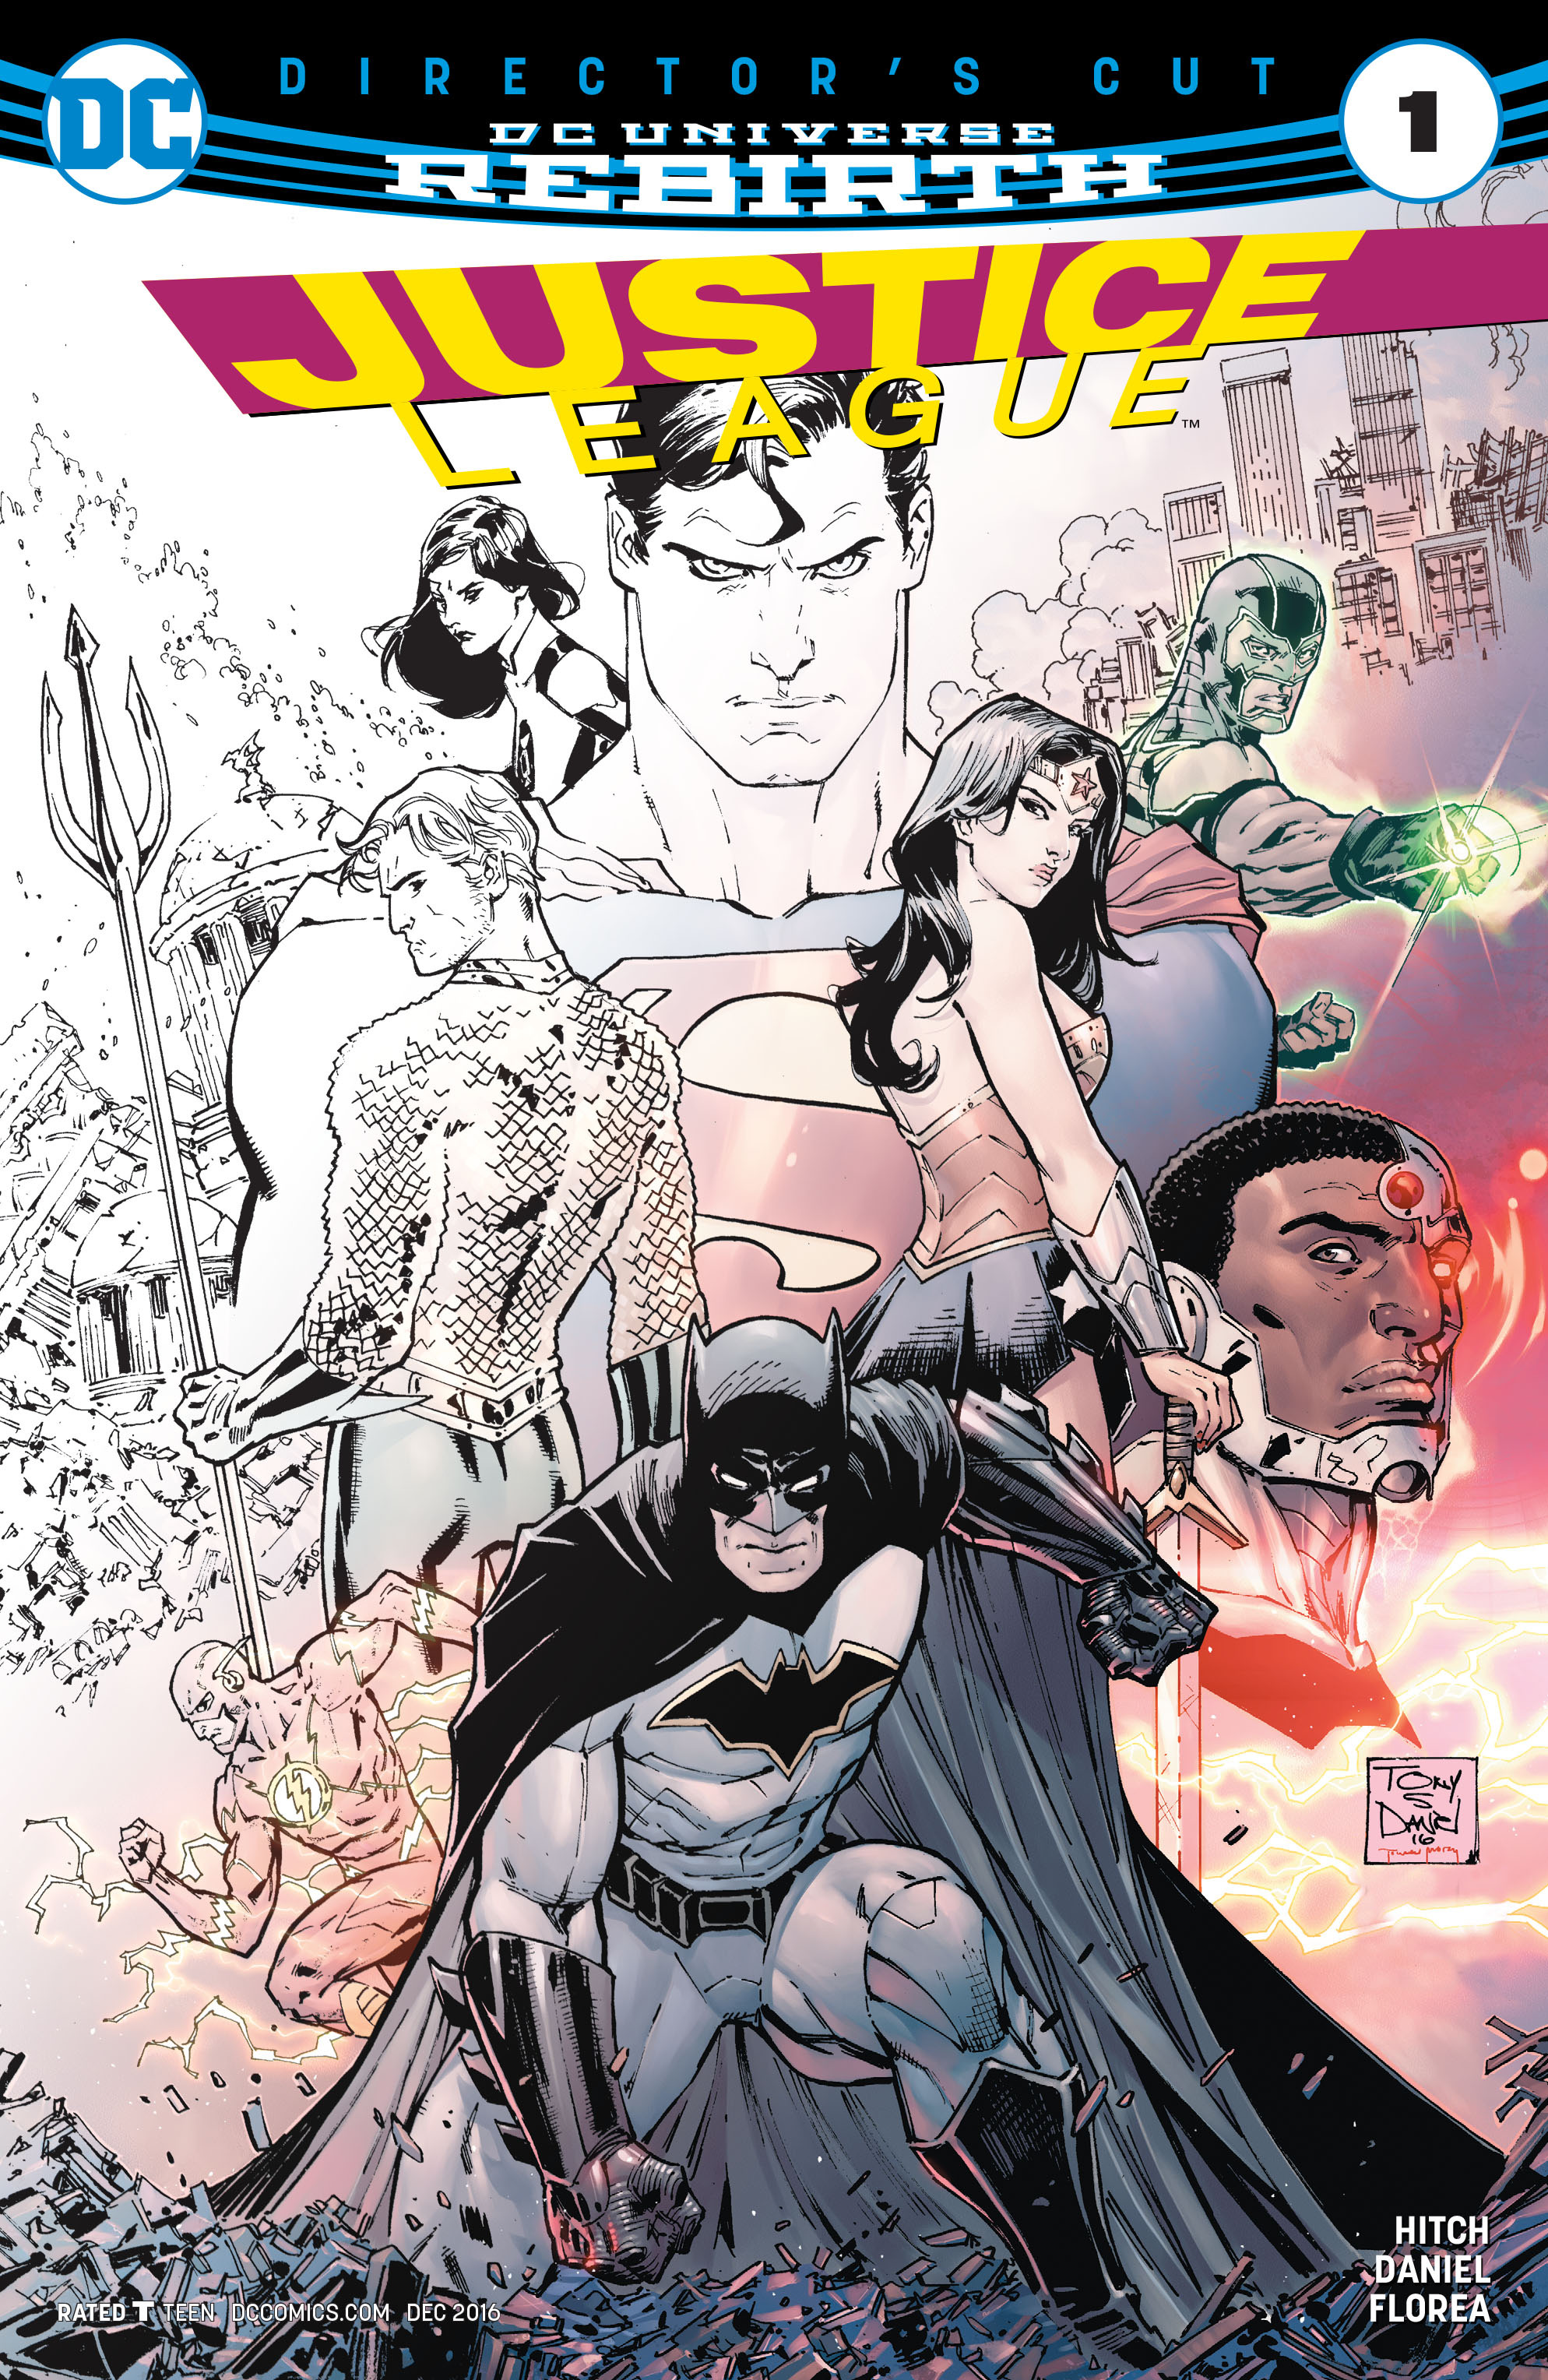 Read online Justice League: Director's Cut comic -  Issue # Full - 1